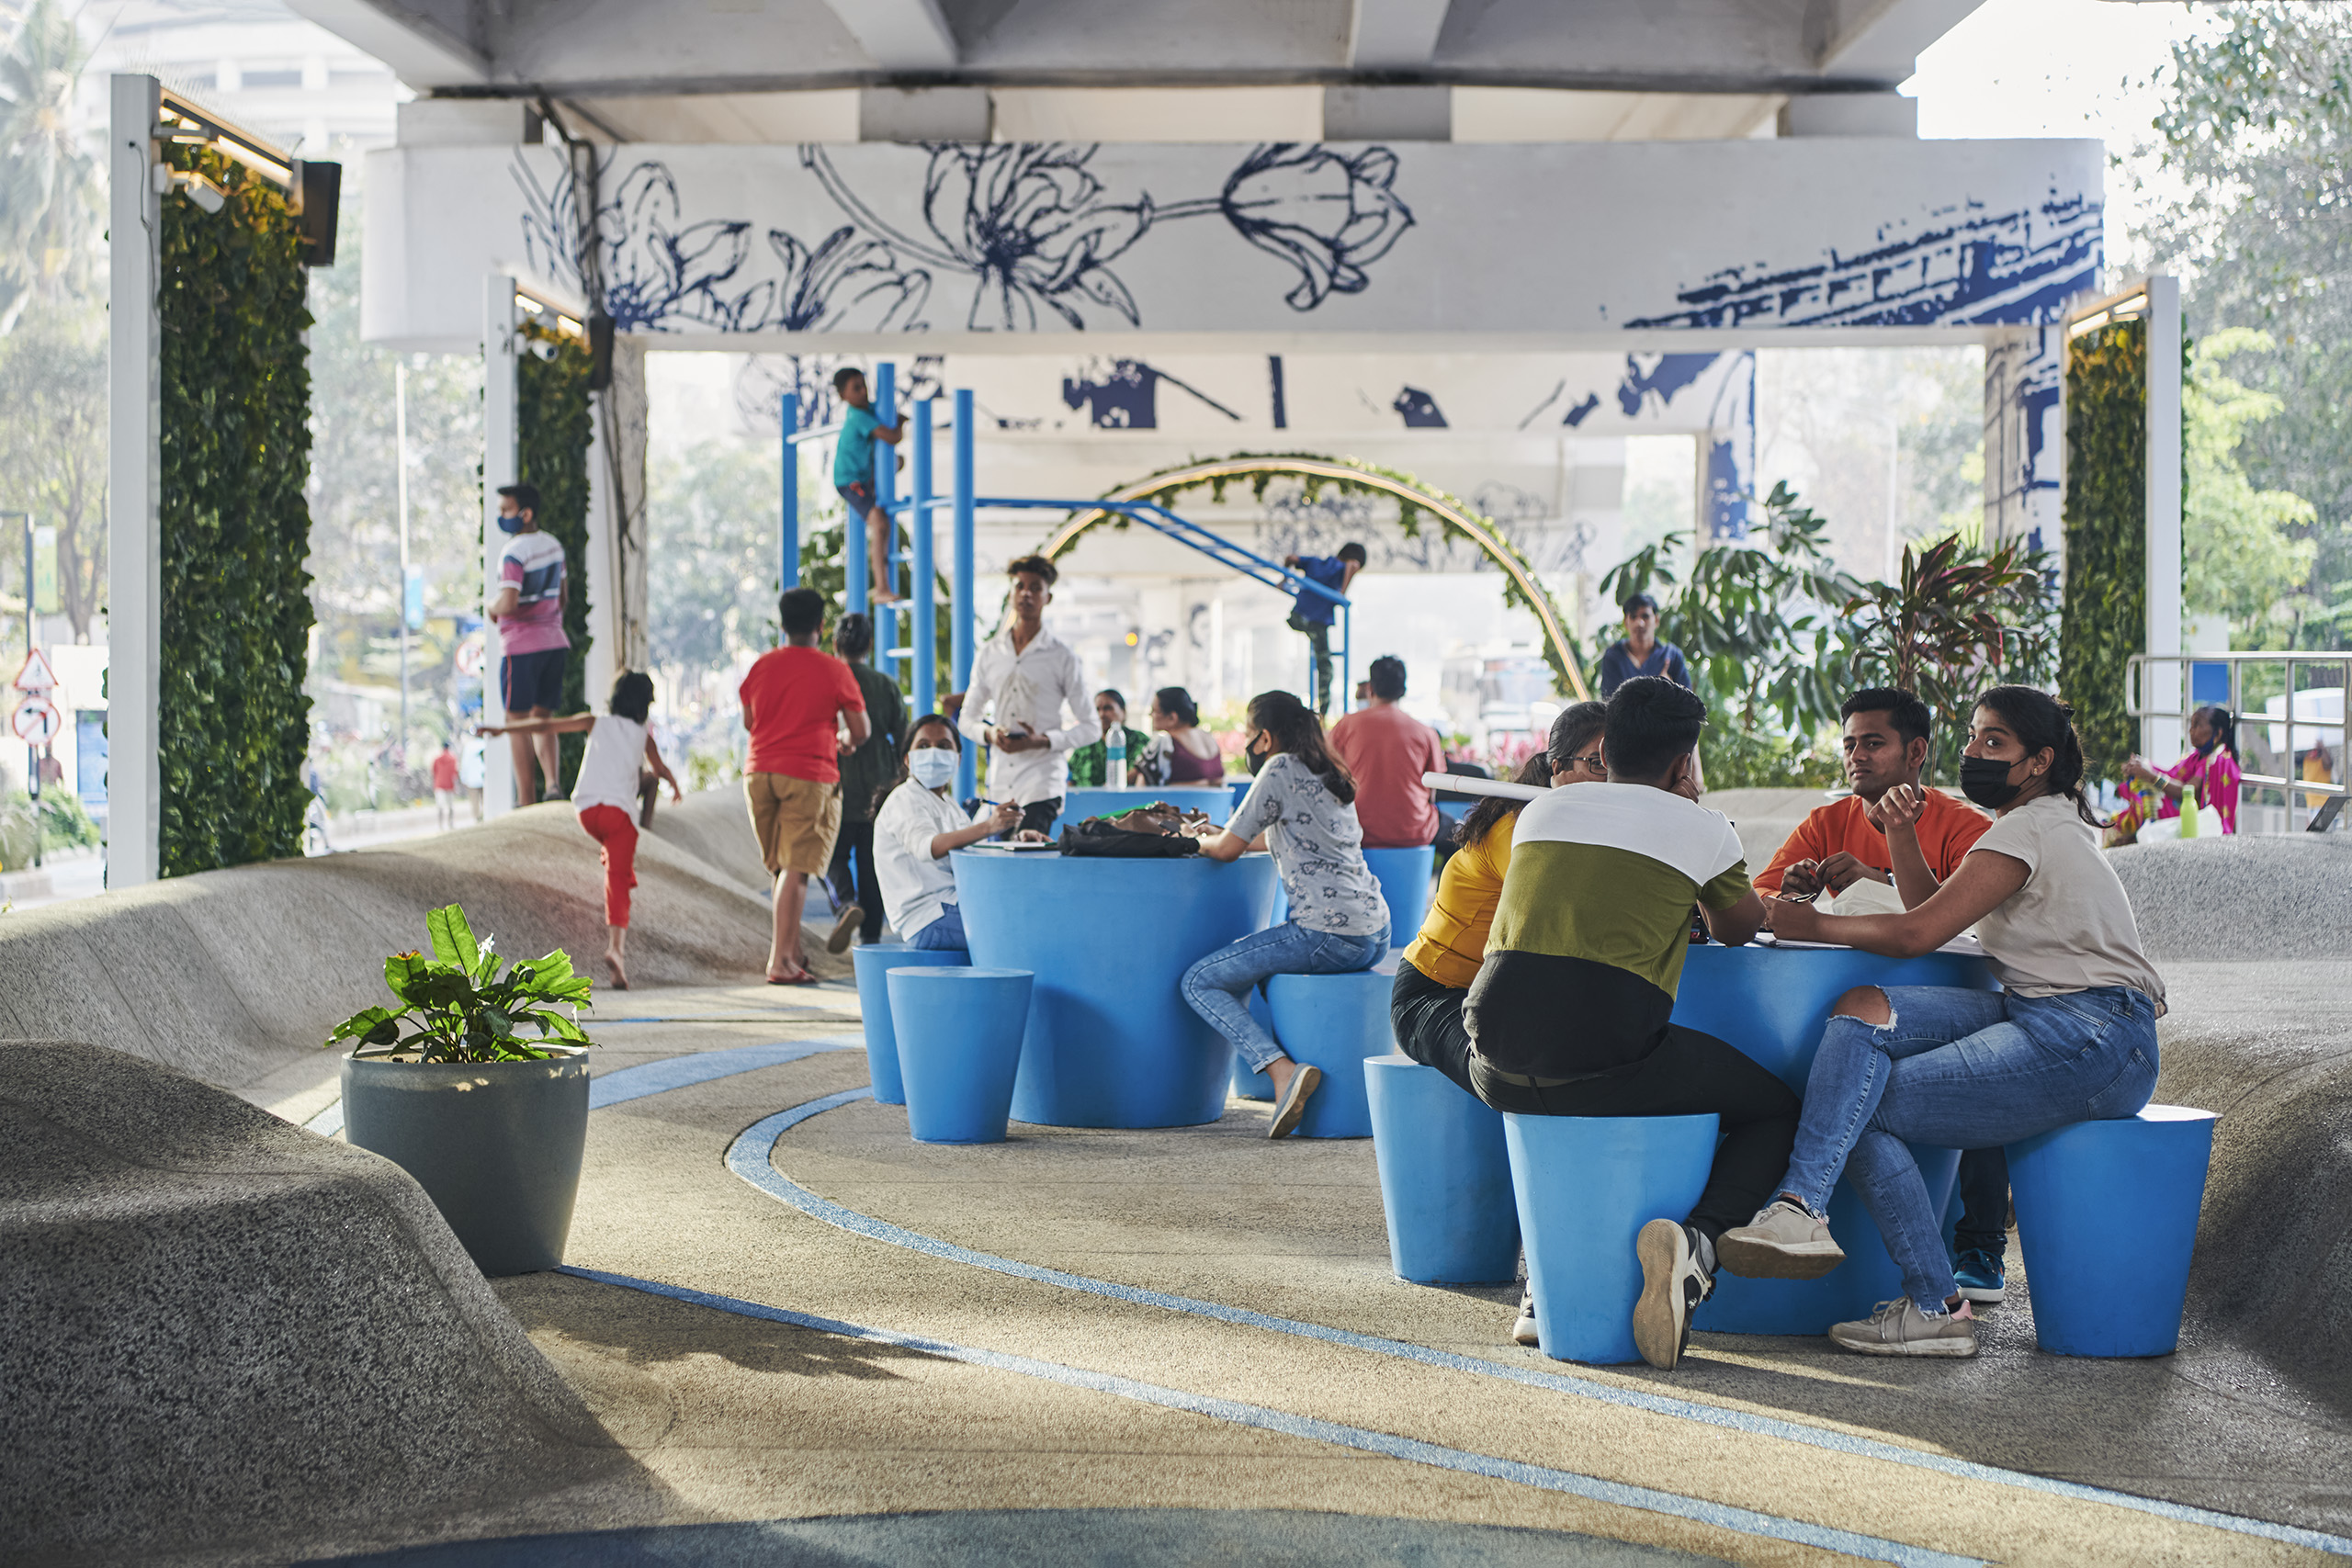 The space under the flyover was once abandoned, now it has become a fun community space